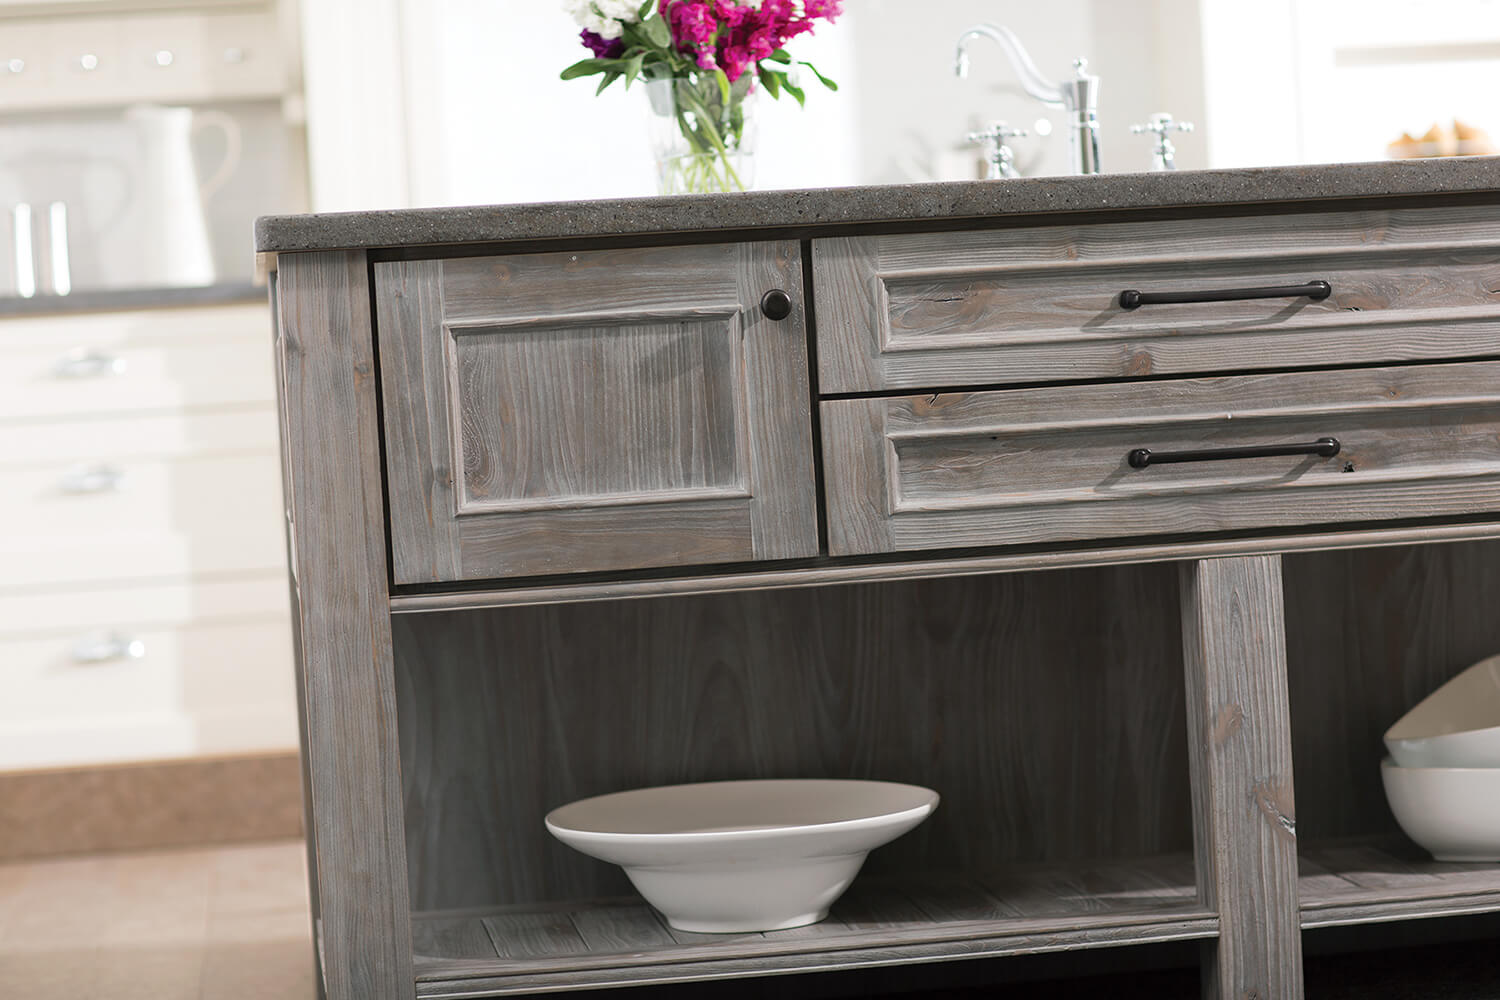 A light gray stained kitchen island with a weathered wood finish in a rustic Knotty Alder wood species.